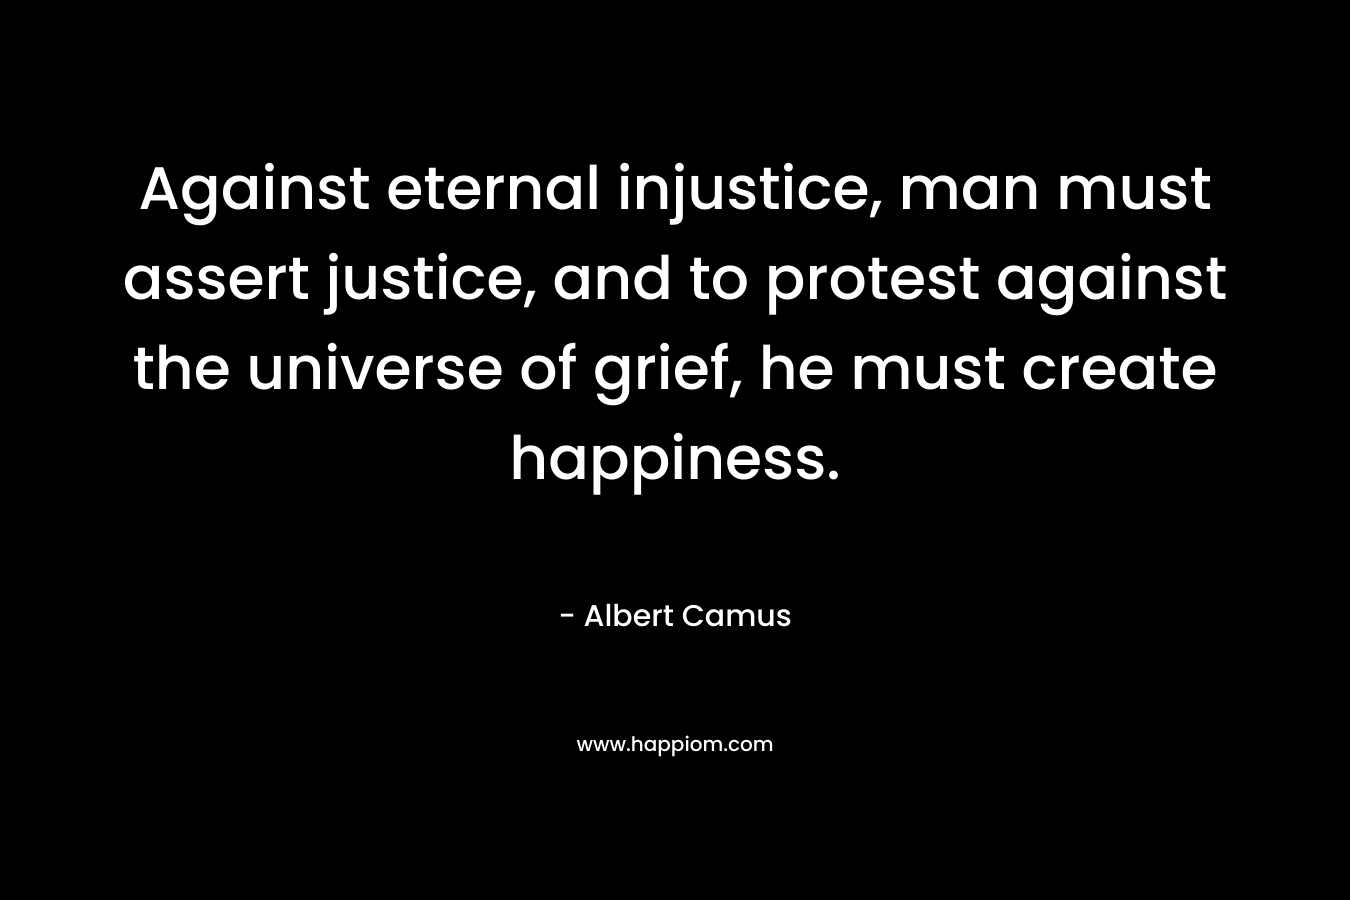 Against eternal injustice, man must assert justice, and to protest against the universe of grief, he must create happiness.